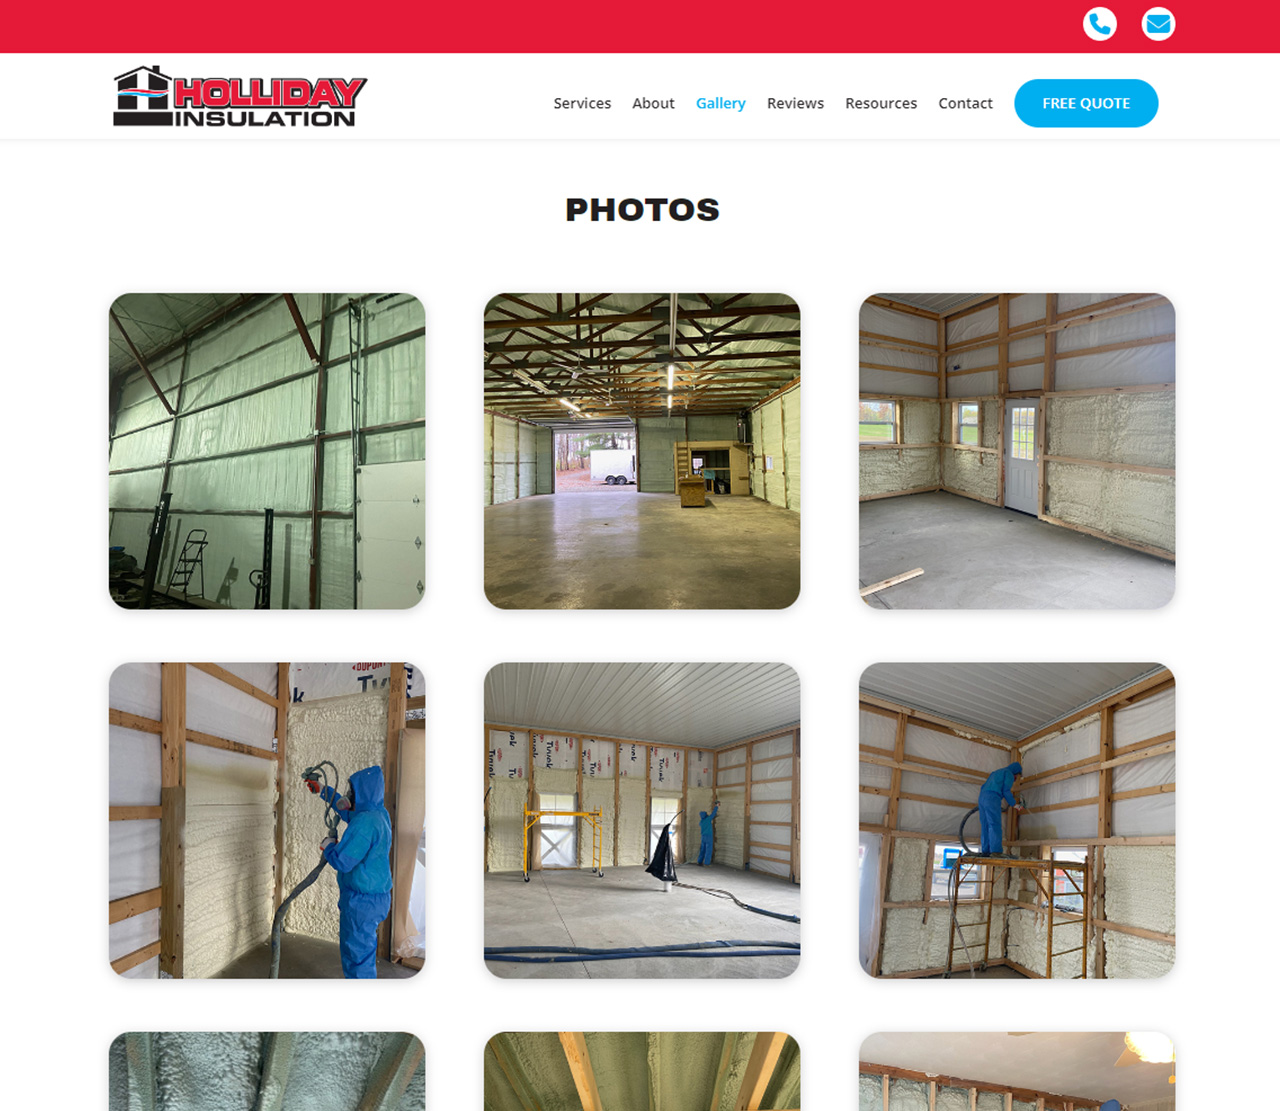 Holliday Insulation Website Gallery Page